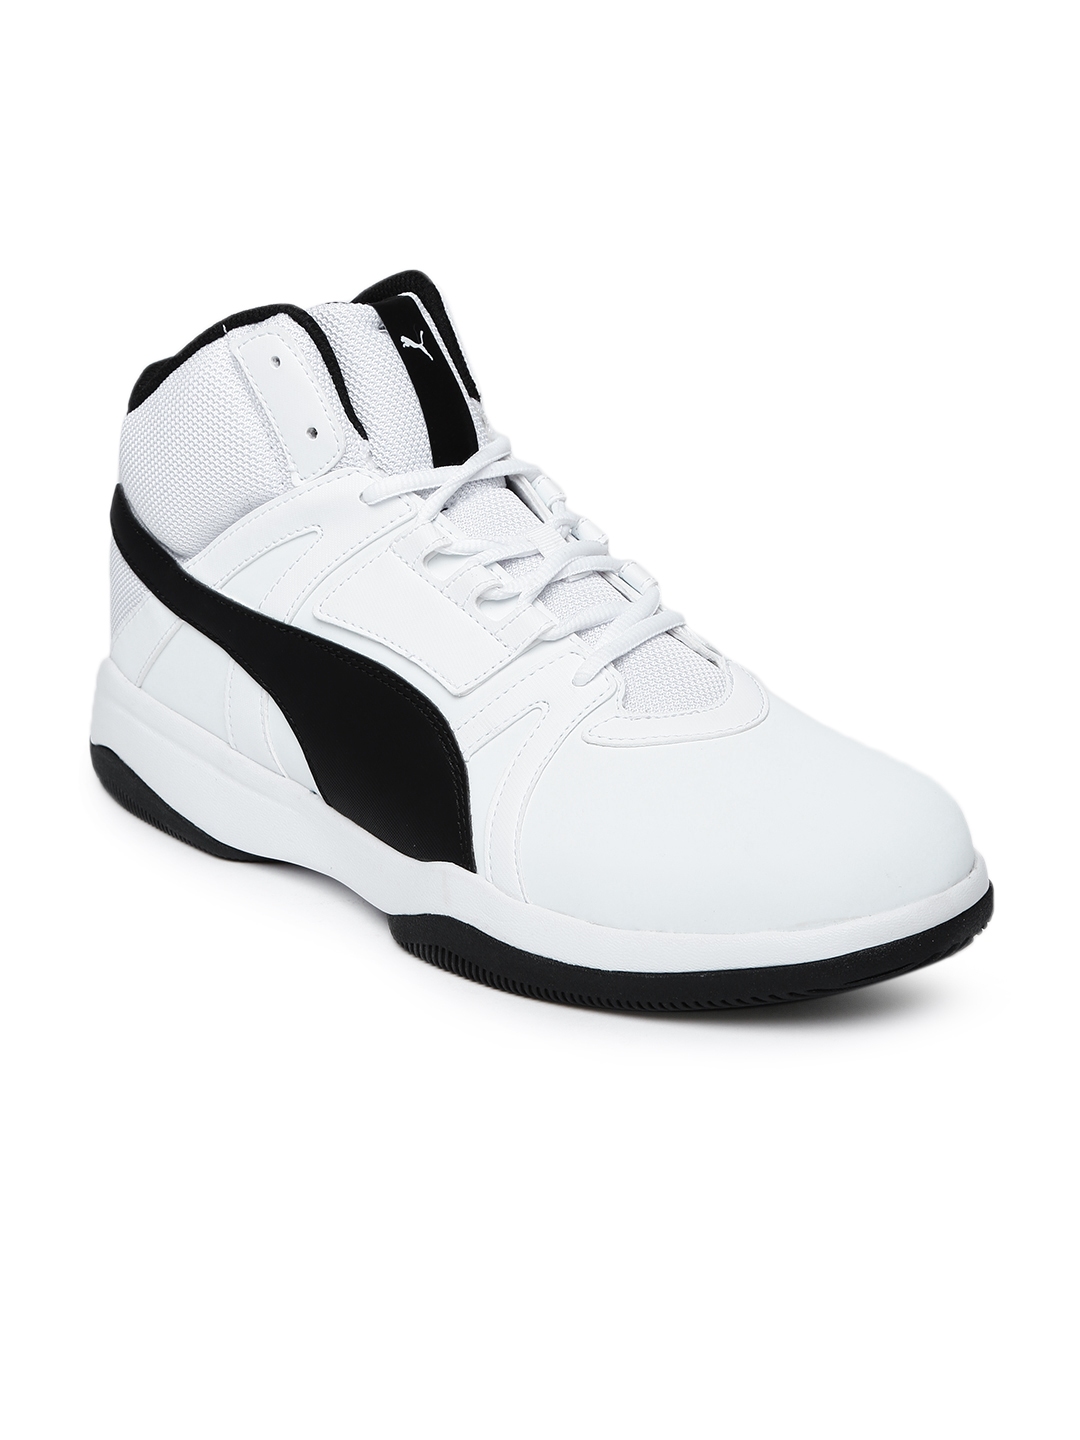 puma high ankle shoes for women